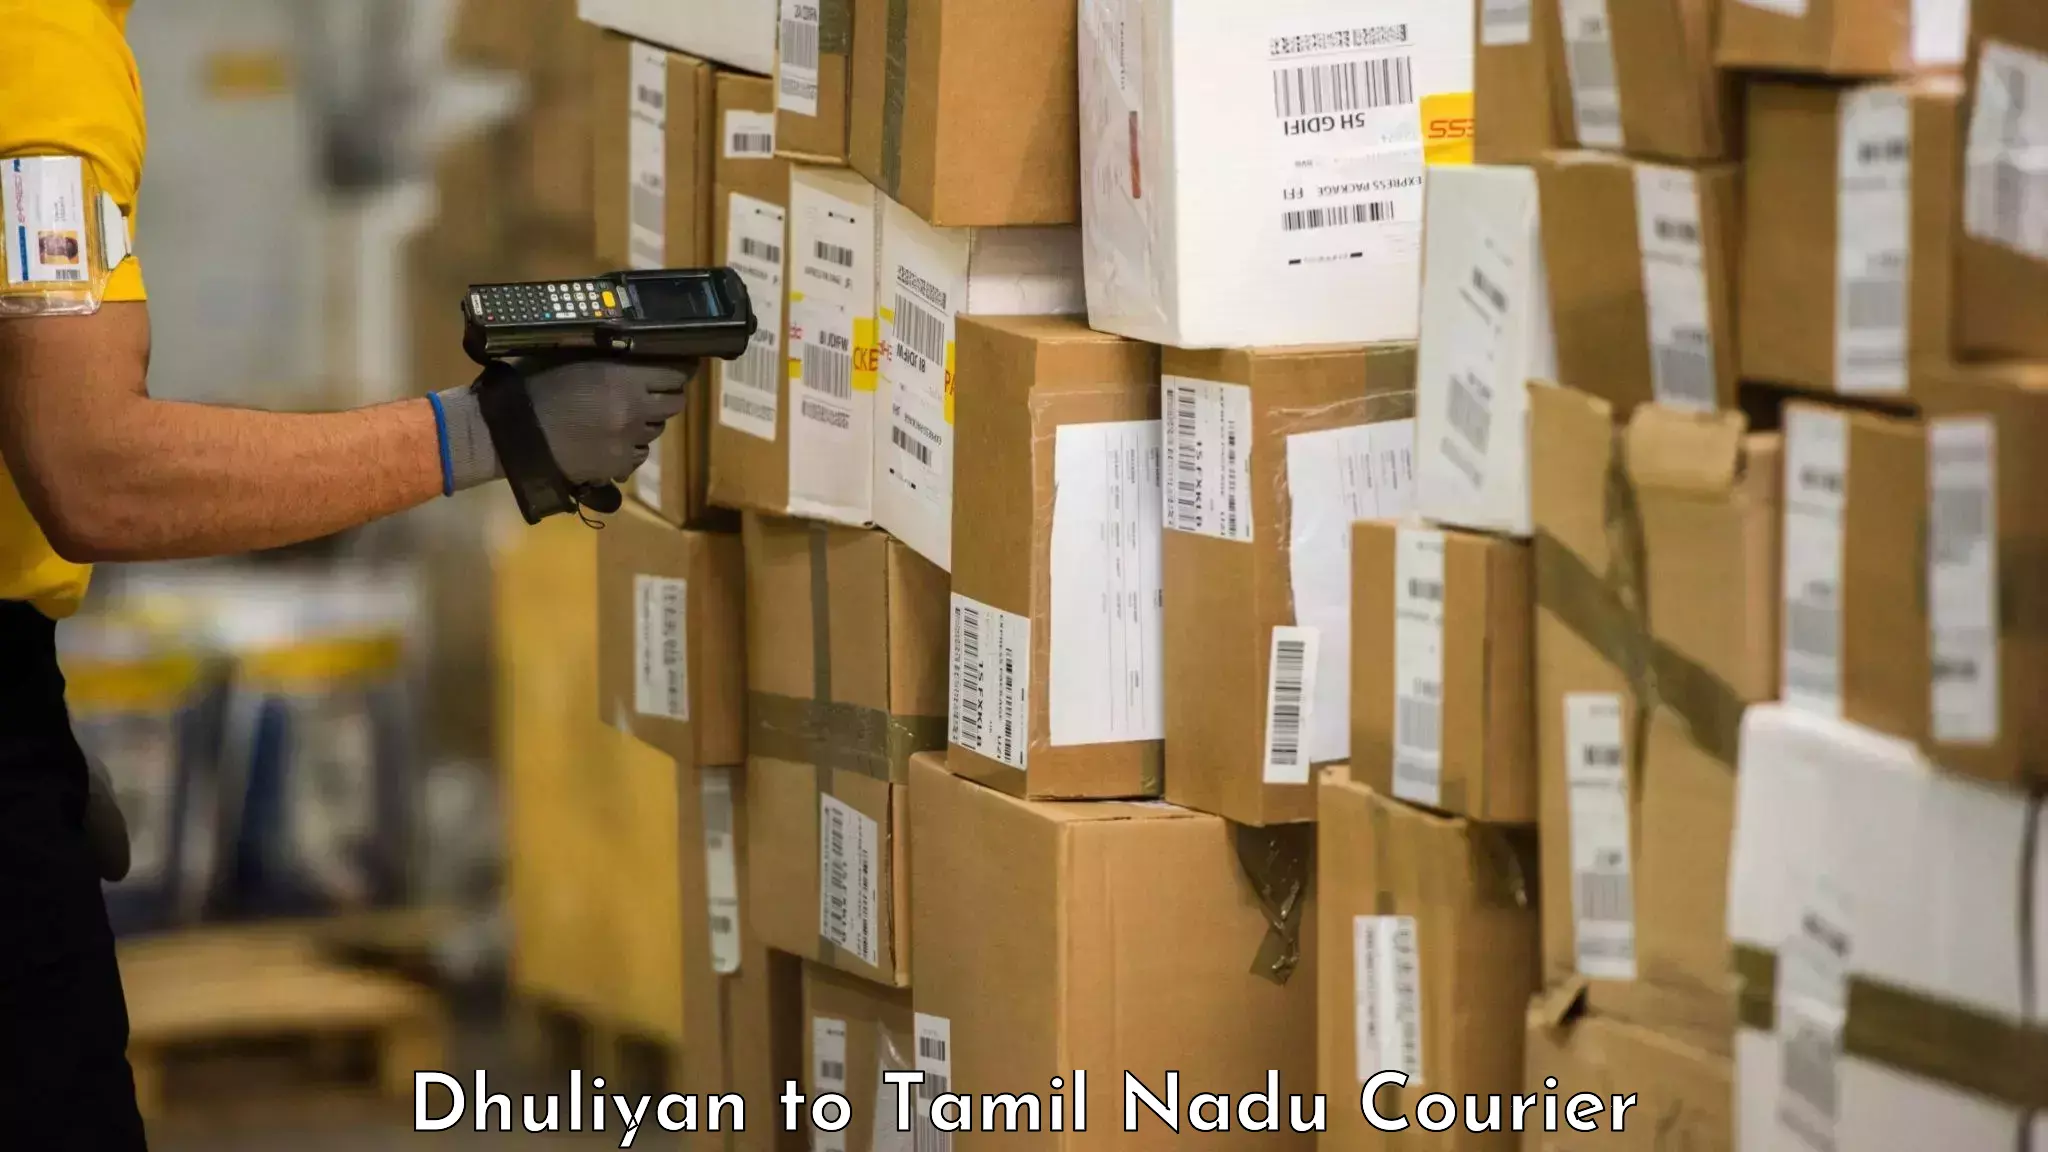 Luggage shipment specialists Dhuliyan to SRM Institute of Science and Technology Chennai